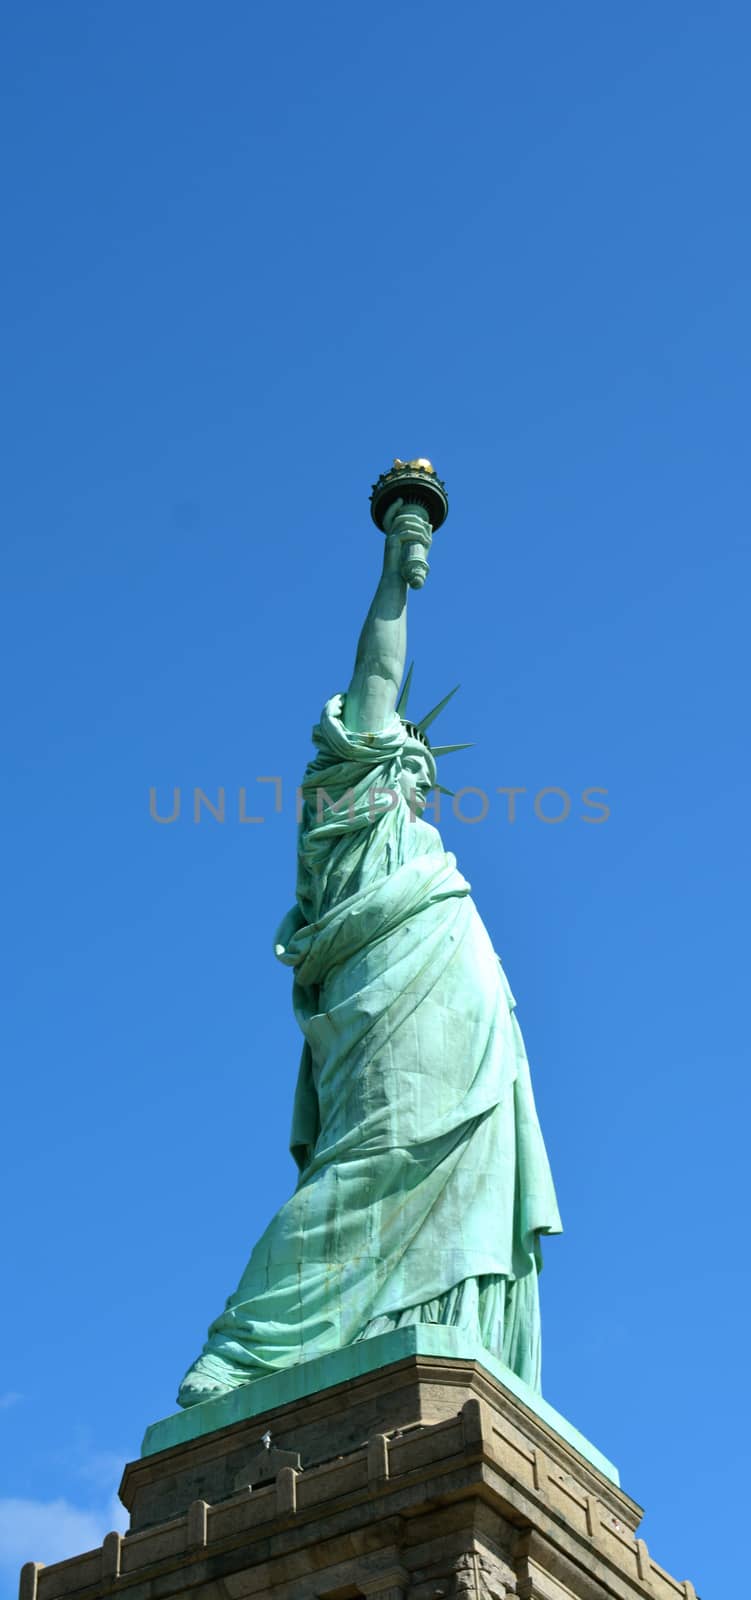 Statue of Liberty - New York City  - 72 by RefocusPhoto